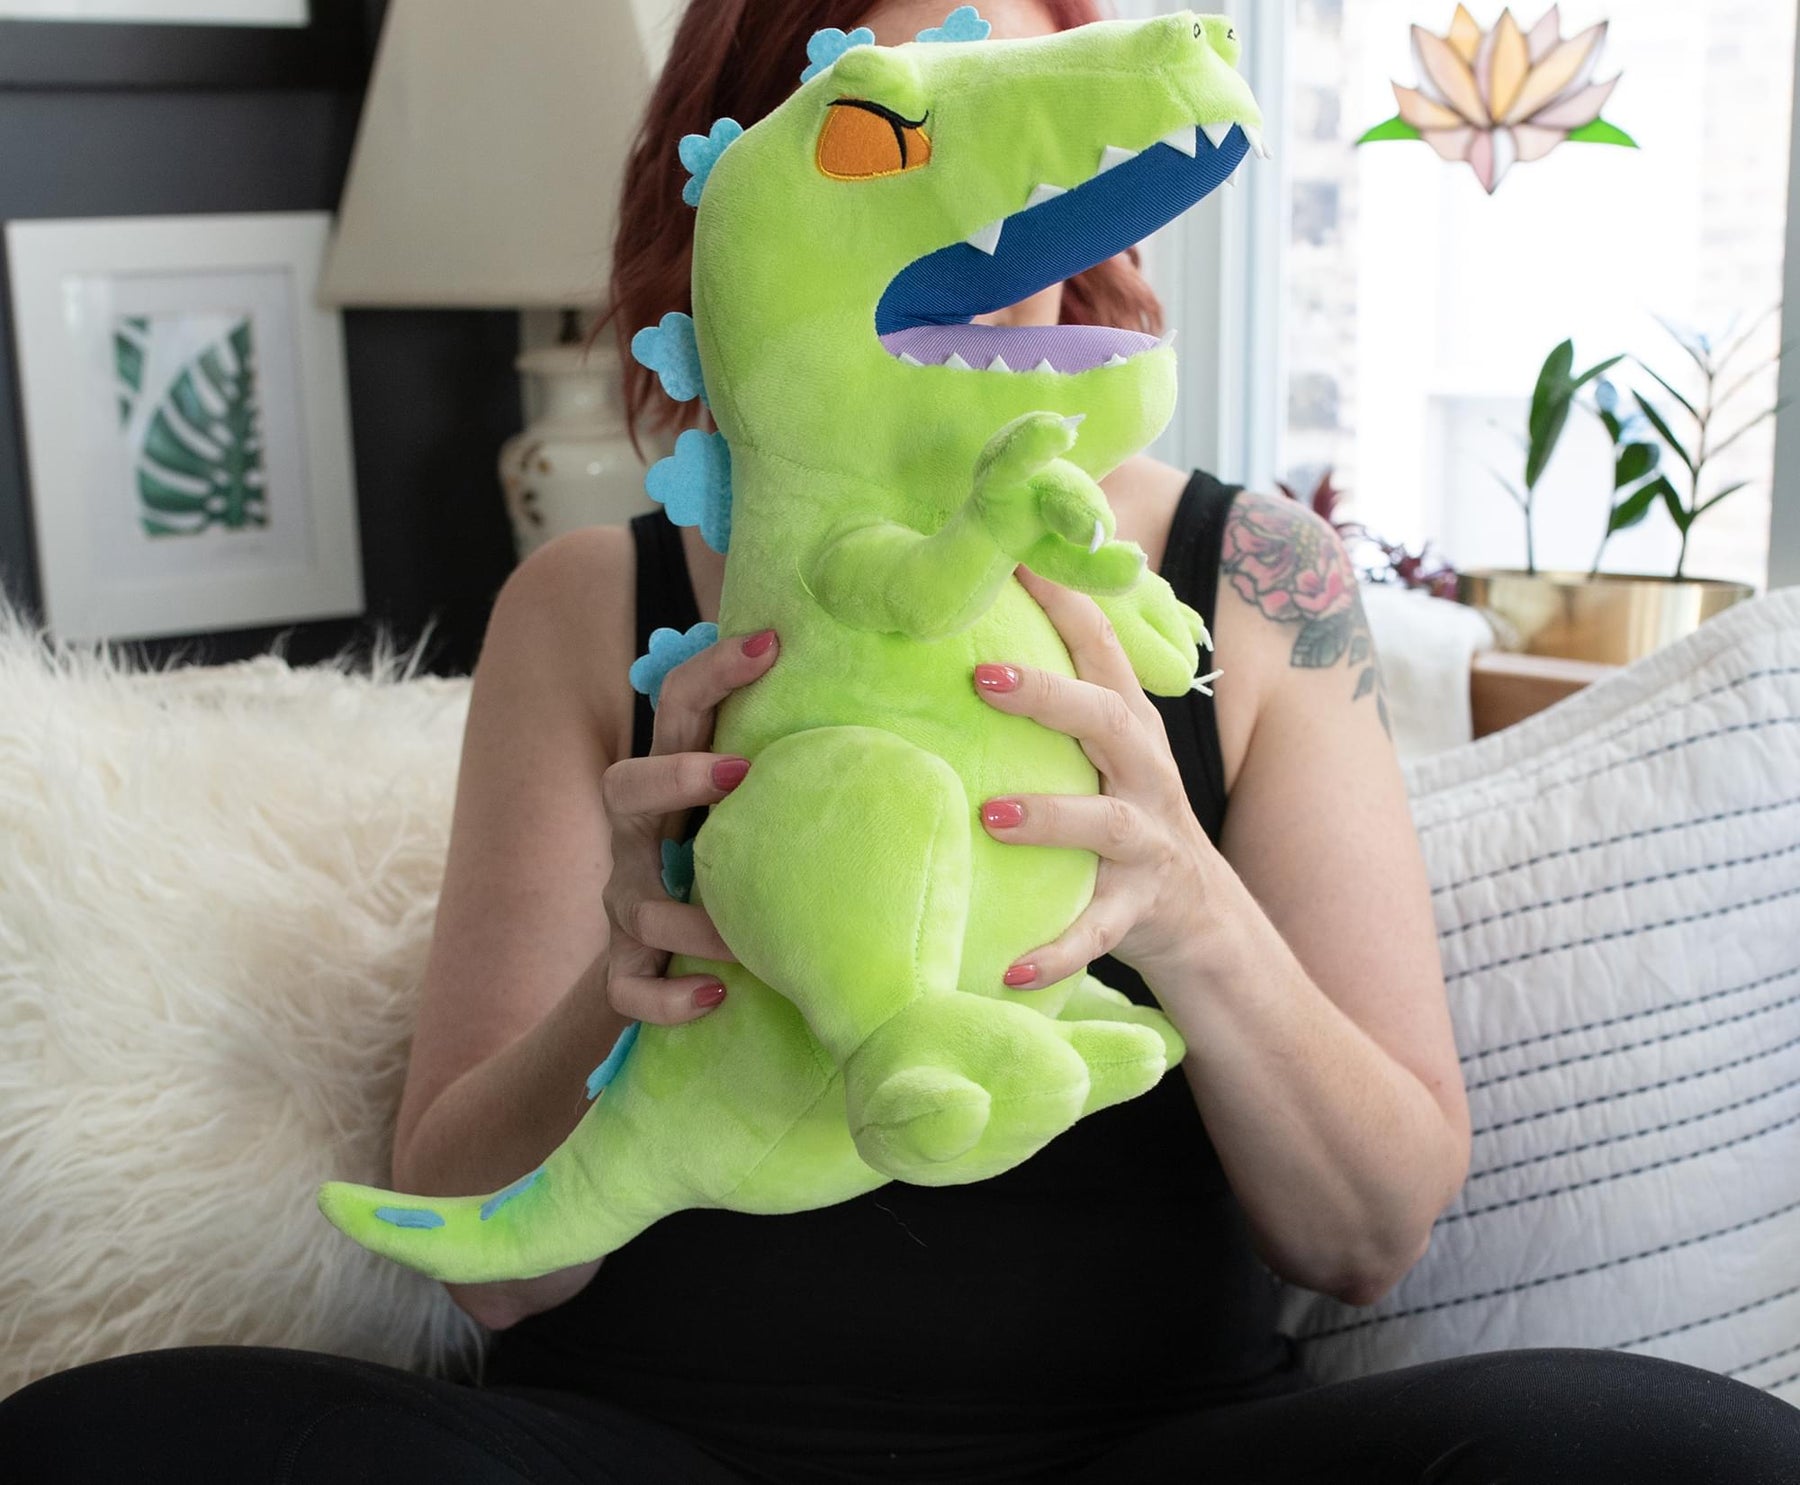 Nickelodeon Rugrats 15-Inch Character Plush Toy | Reptar